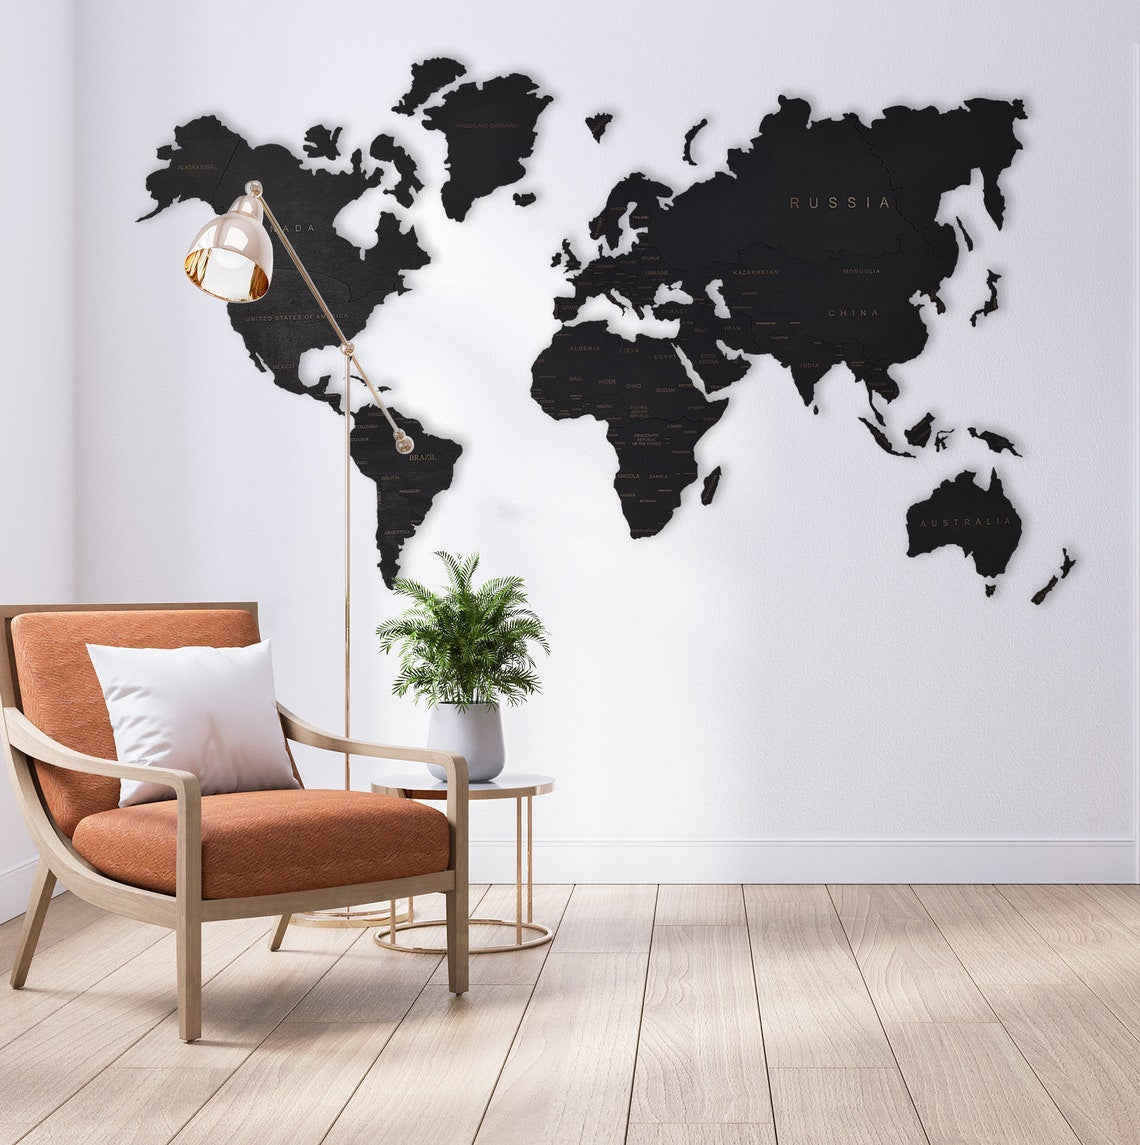 Rustic Wooden World Map